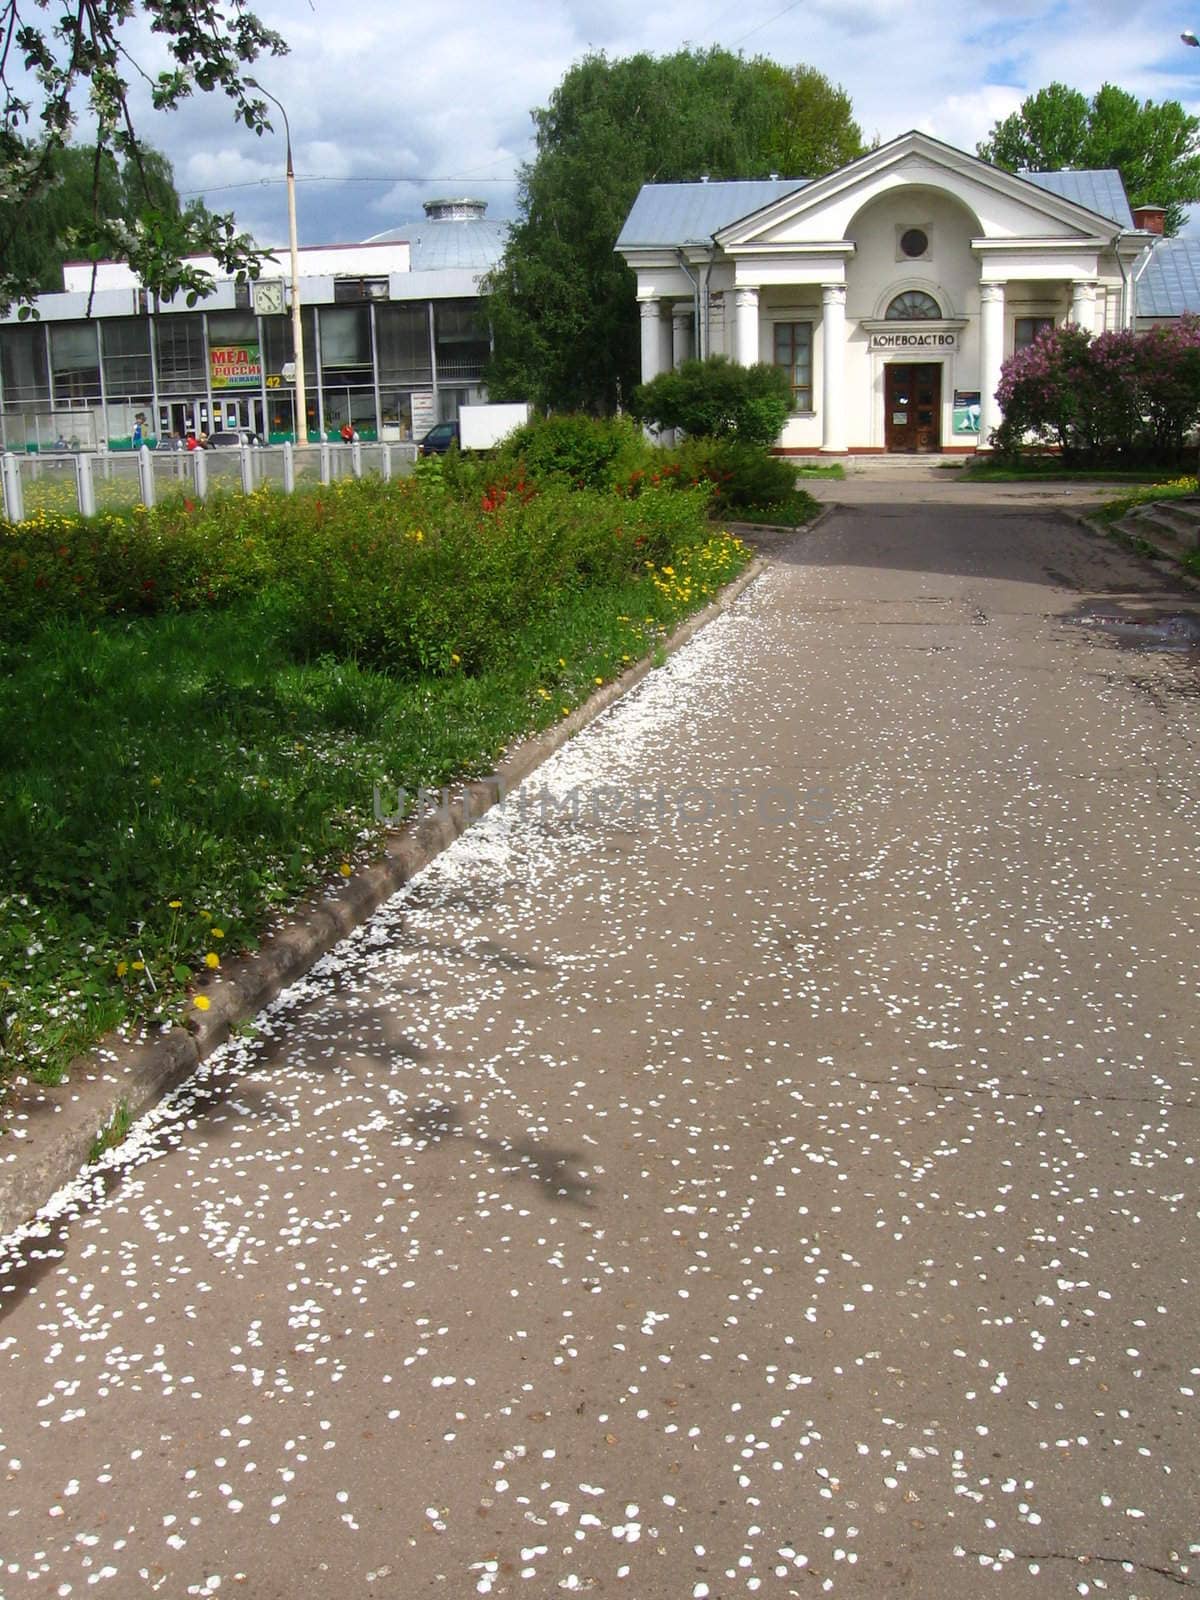 There are a lot of apple-tree petals on the asphalt